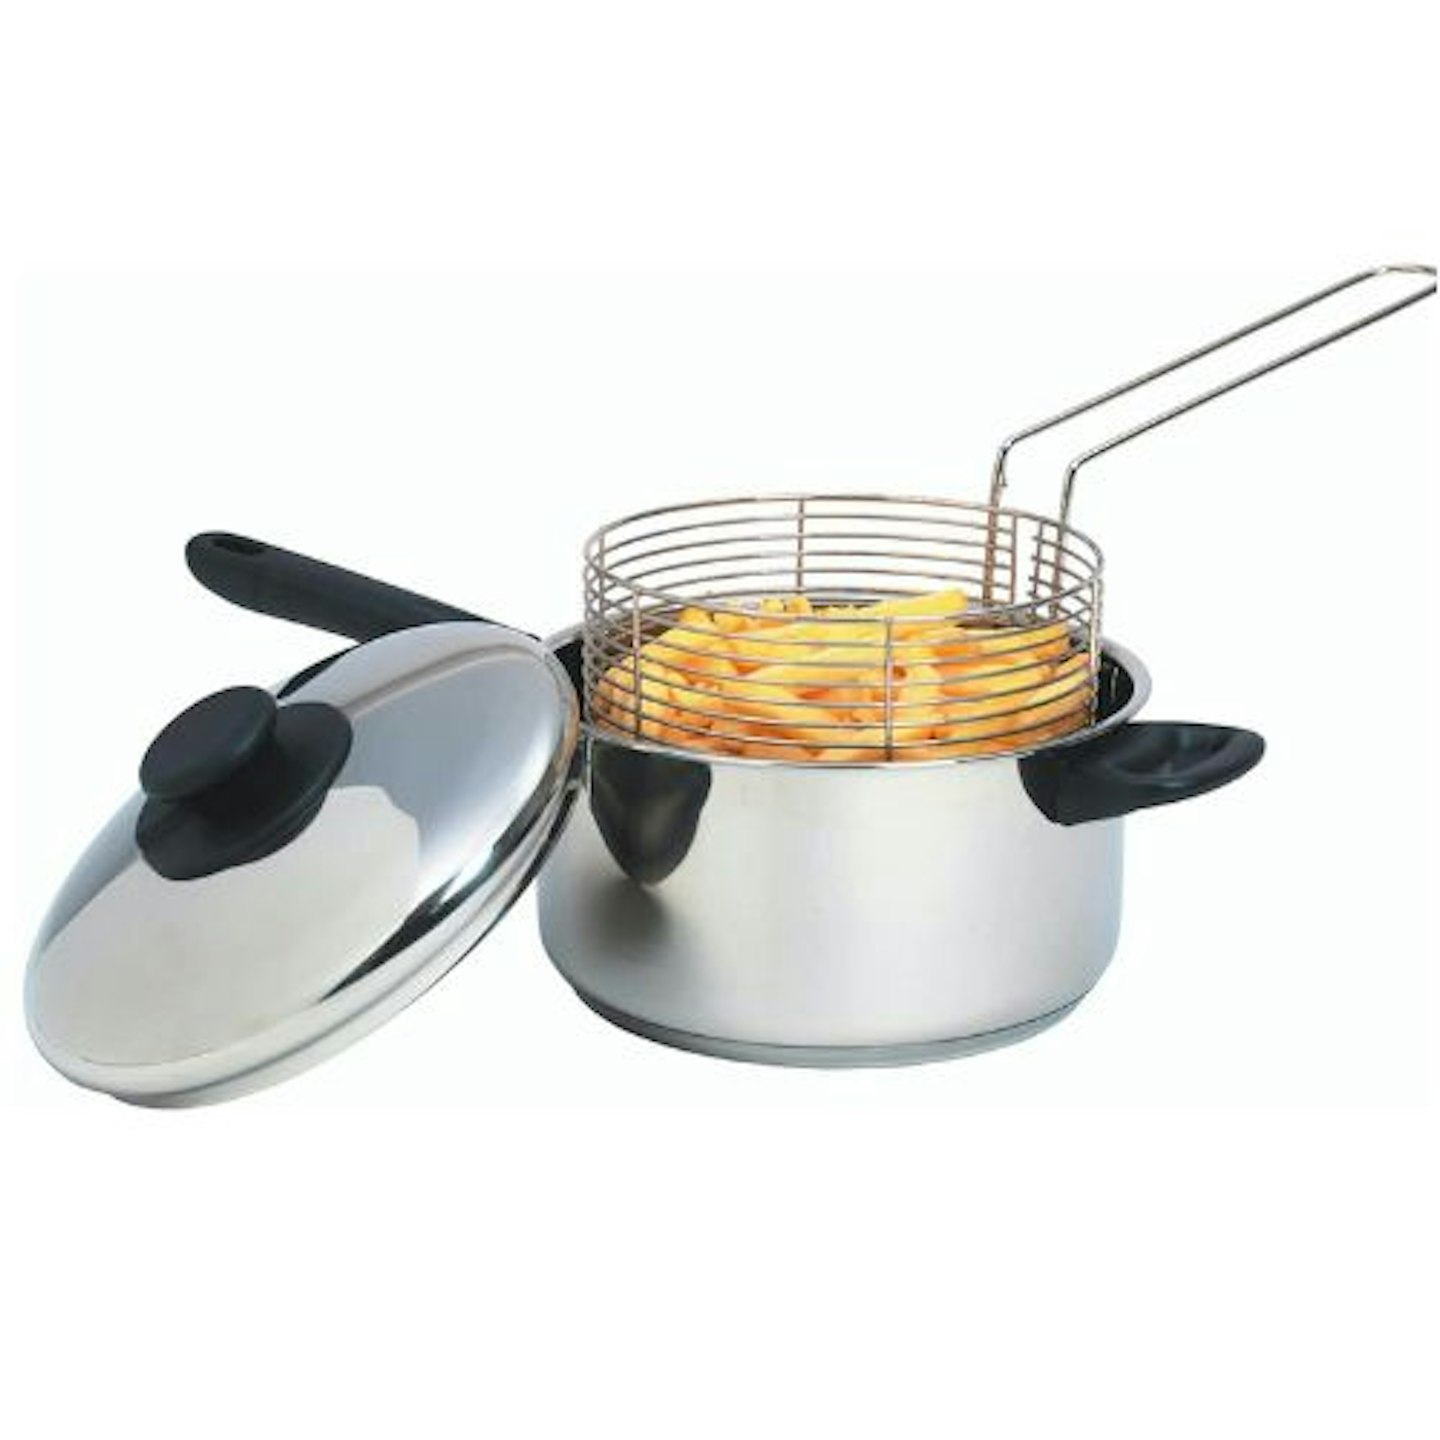 KitchenCraft Large Chip Pan with Basket and Lid 20cm, Induction Safe, Stainless Steel, Silver